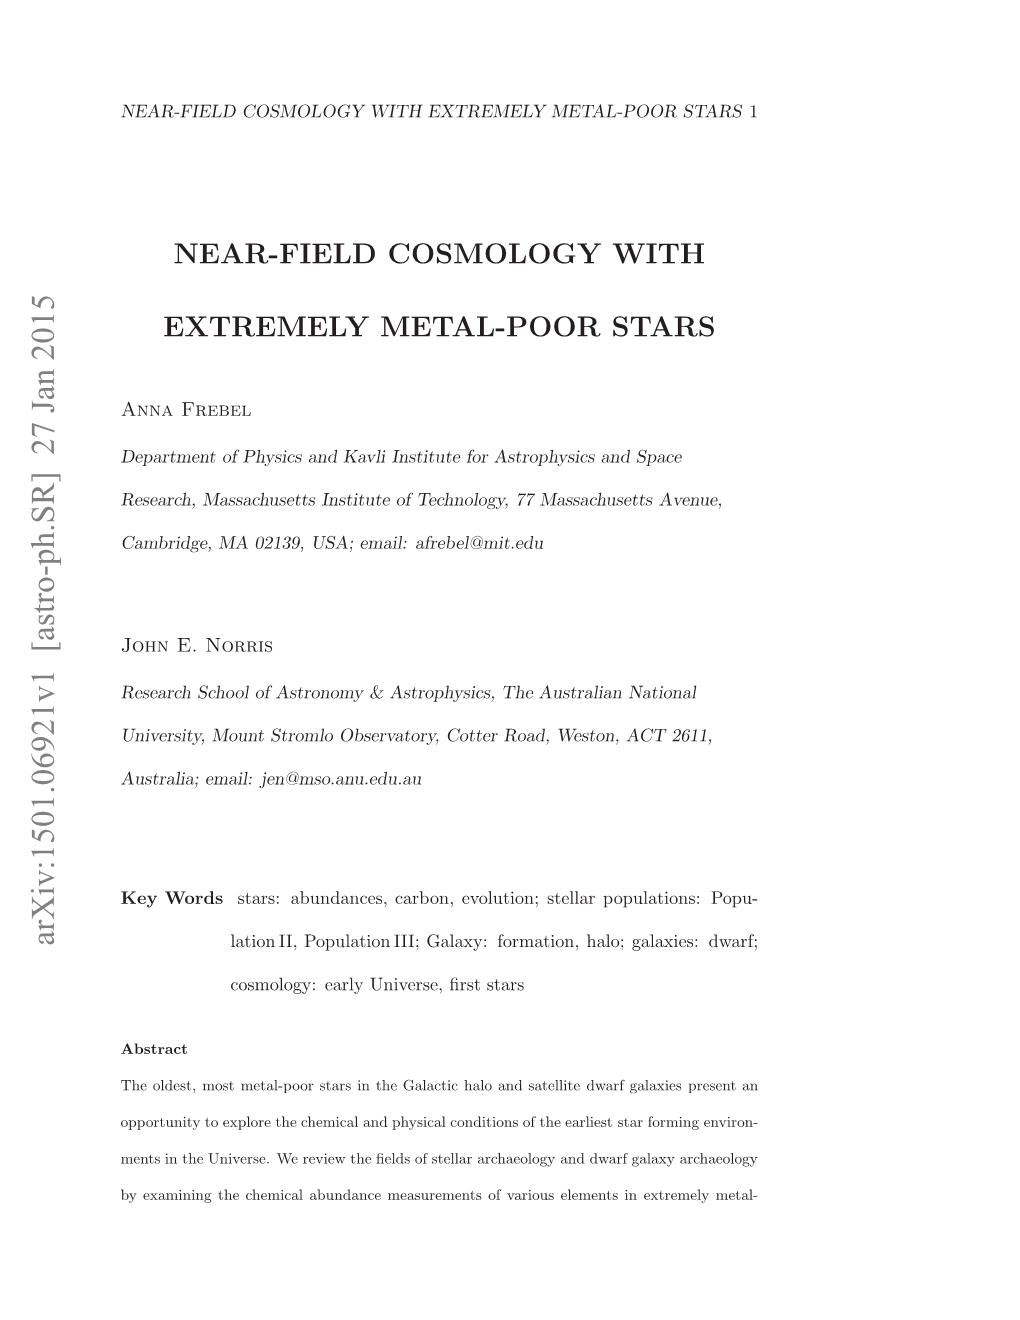 Near-Field Cosmology with Metal-Poor Stars